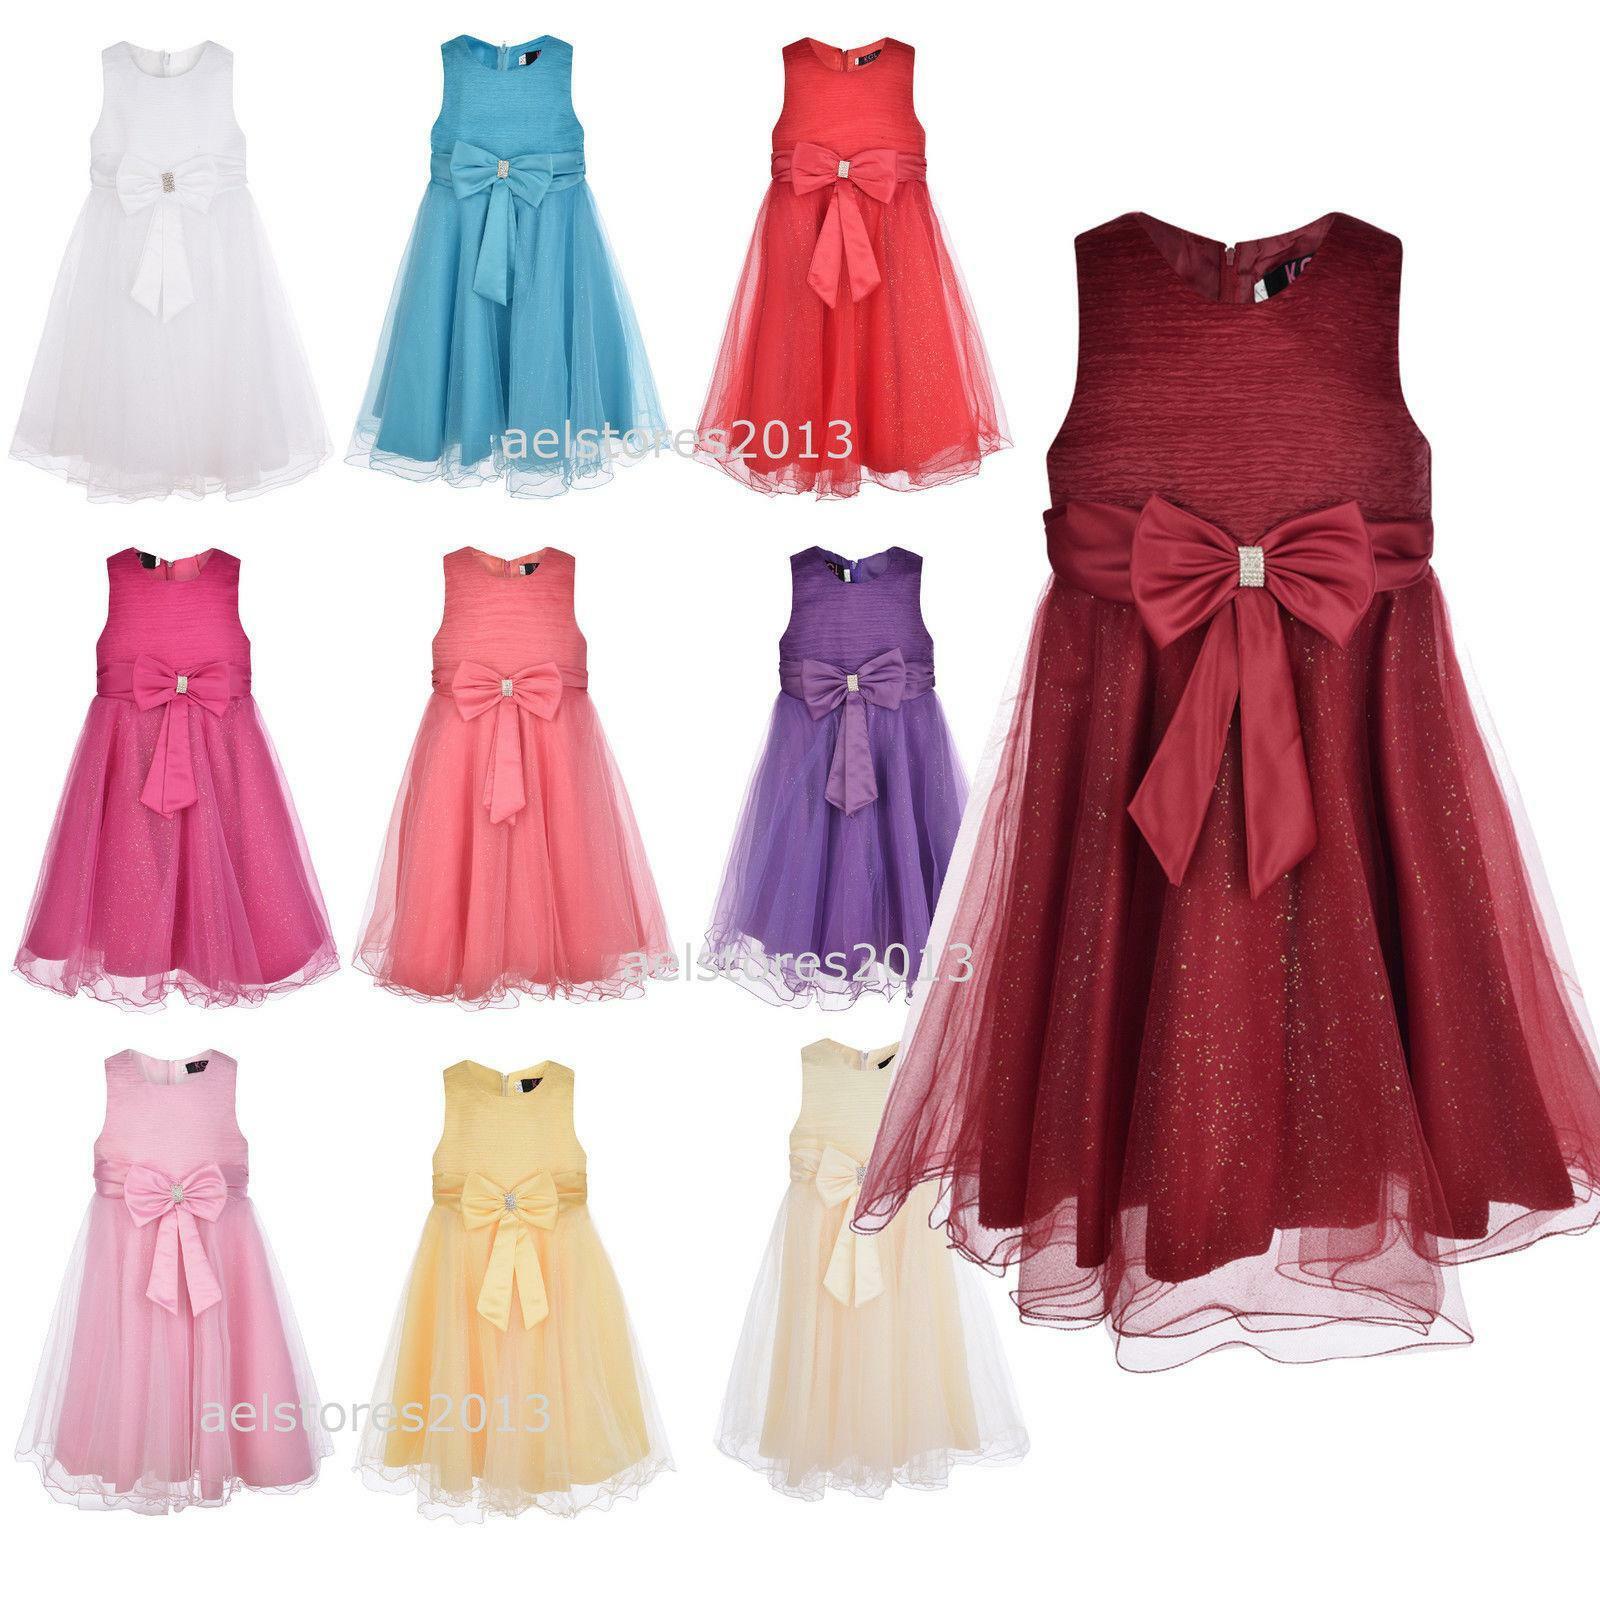 Girls Dresses Bridesmaid Dress Baby Flower Pink Party Rose Bow Wedding ...